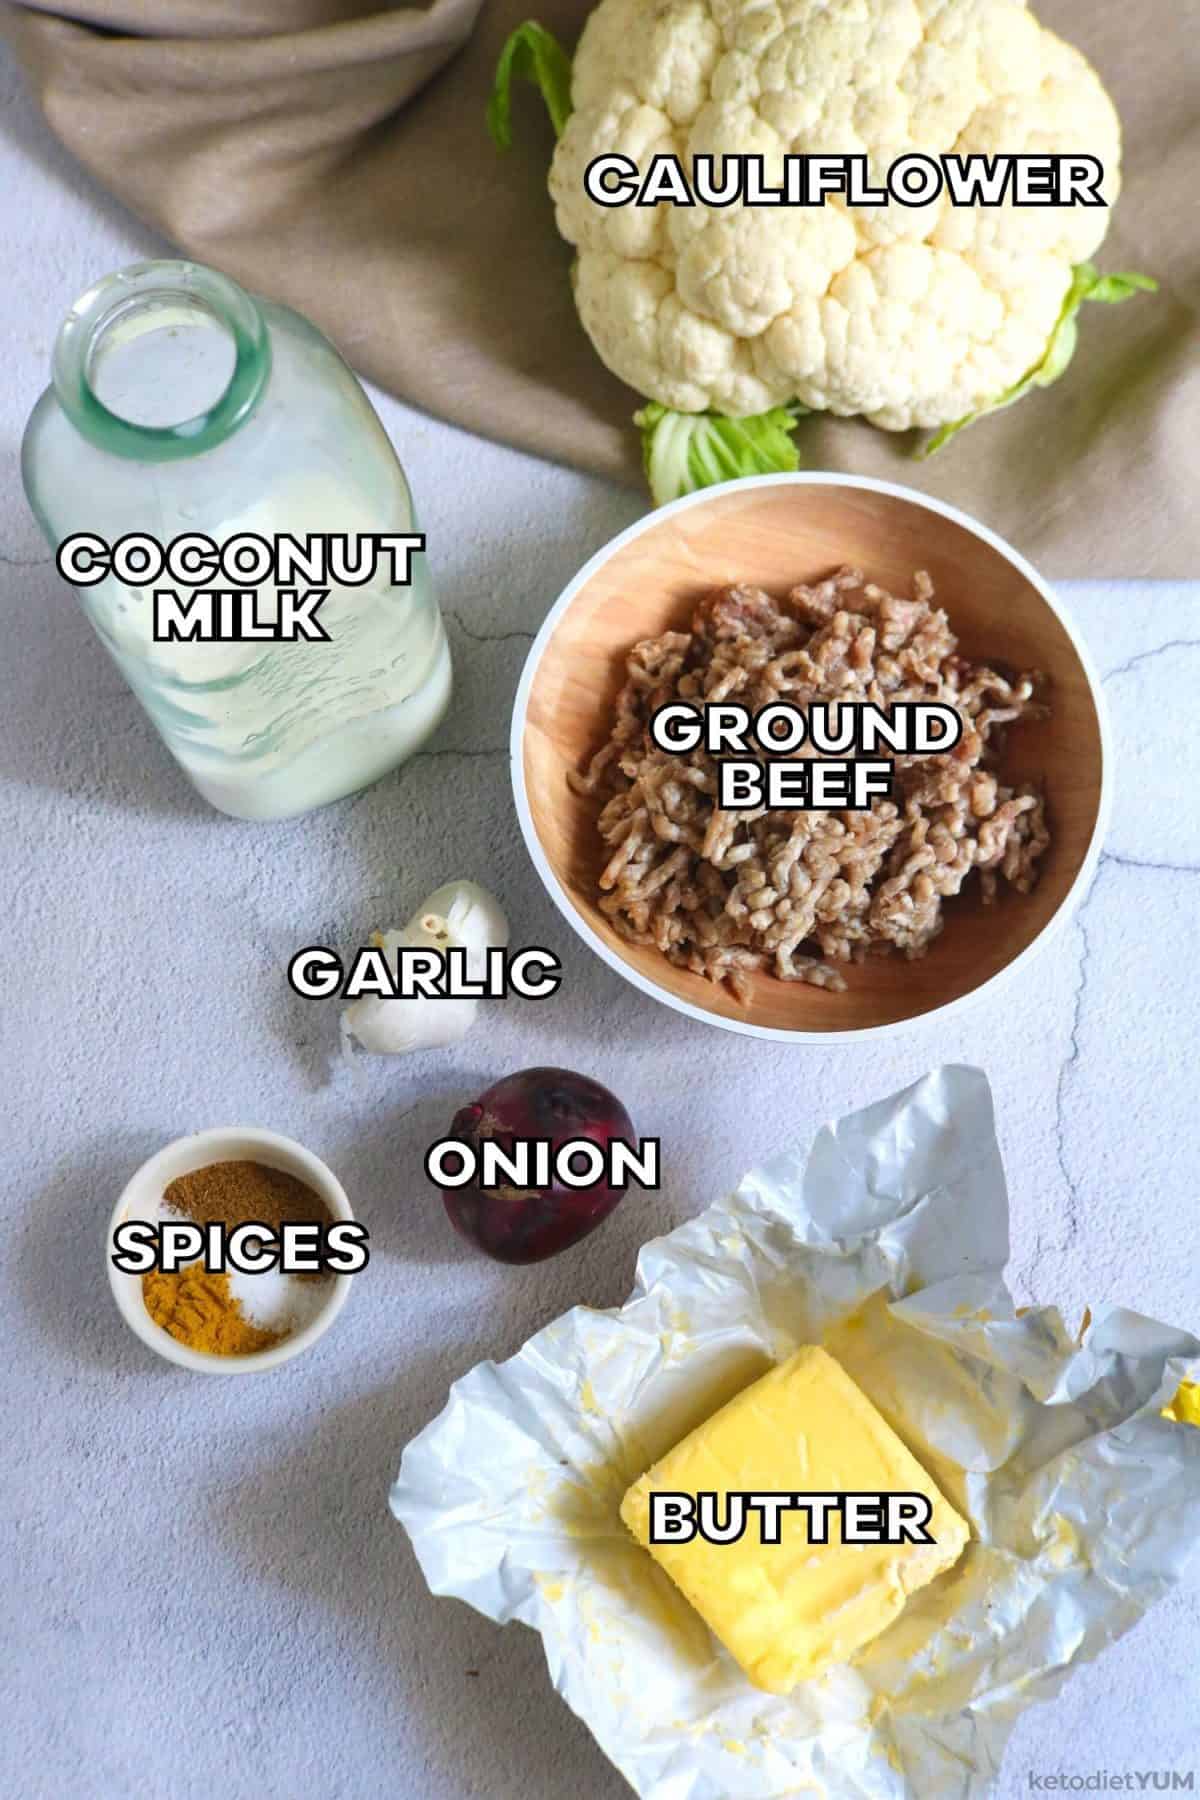 Ingredients needed to make a keto curry including ground beef, cauliflower, ghee, coconut milk, garlic, onion and spices